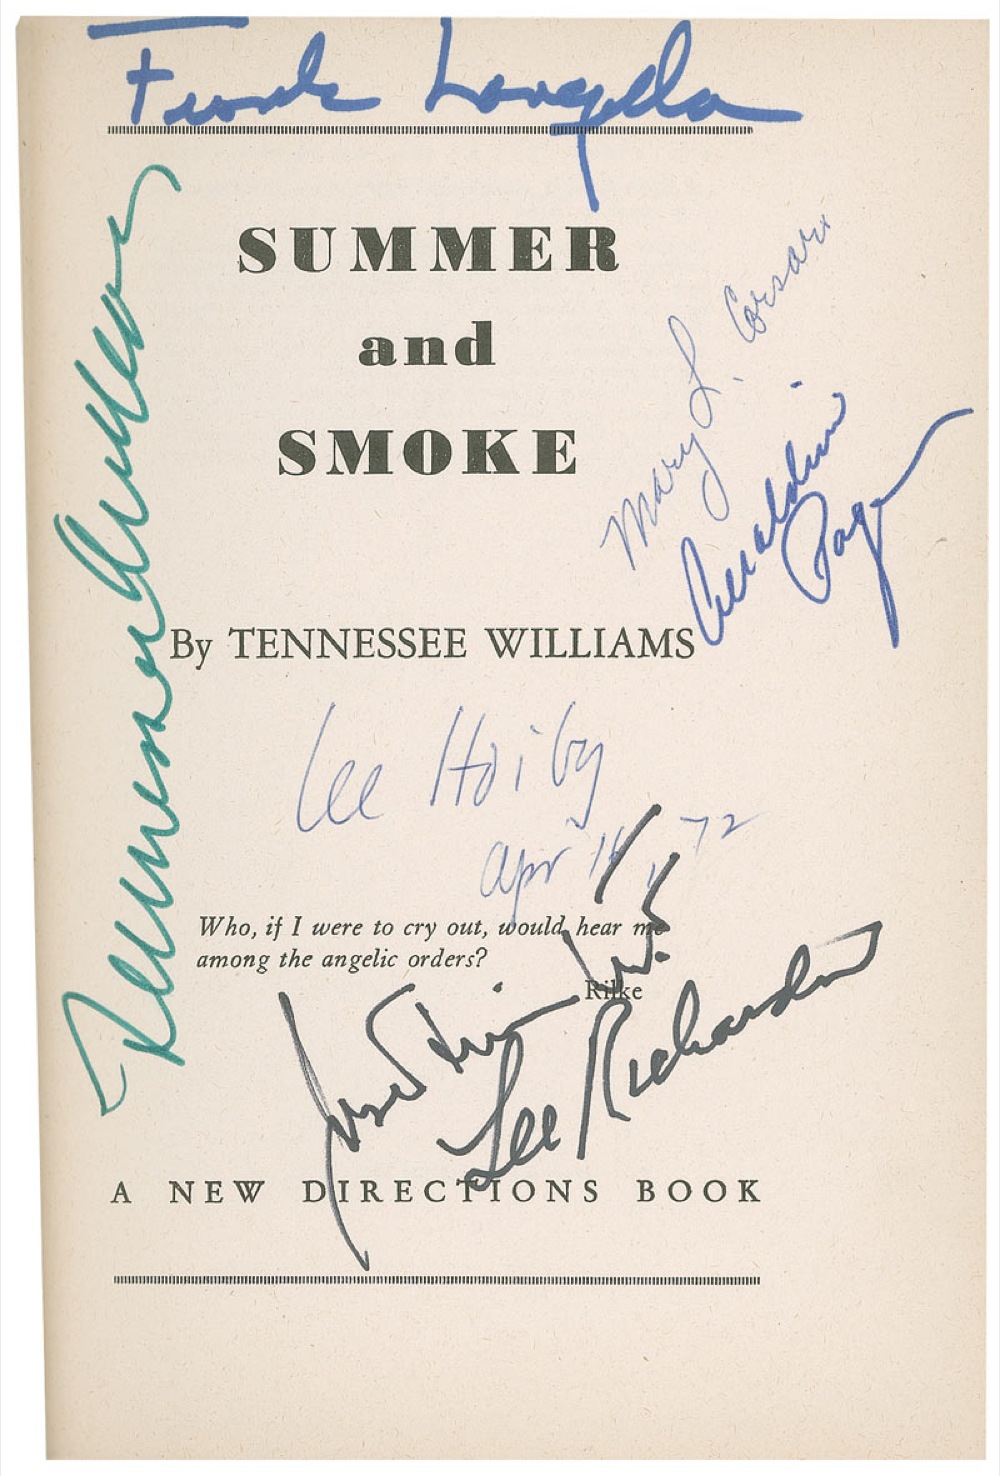 Lot #646 Tennessee Williams